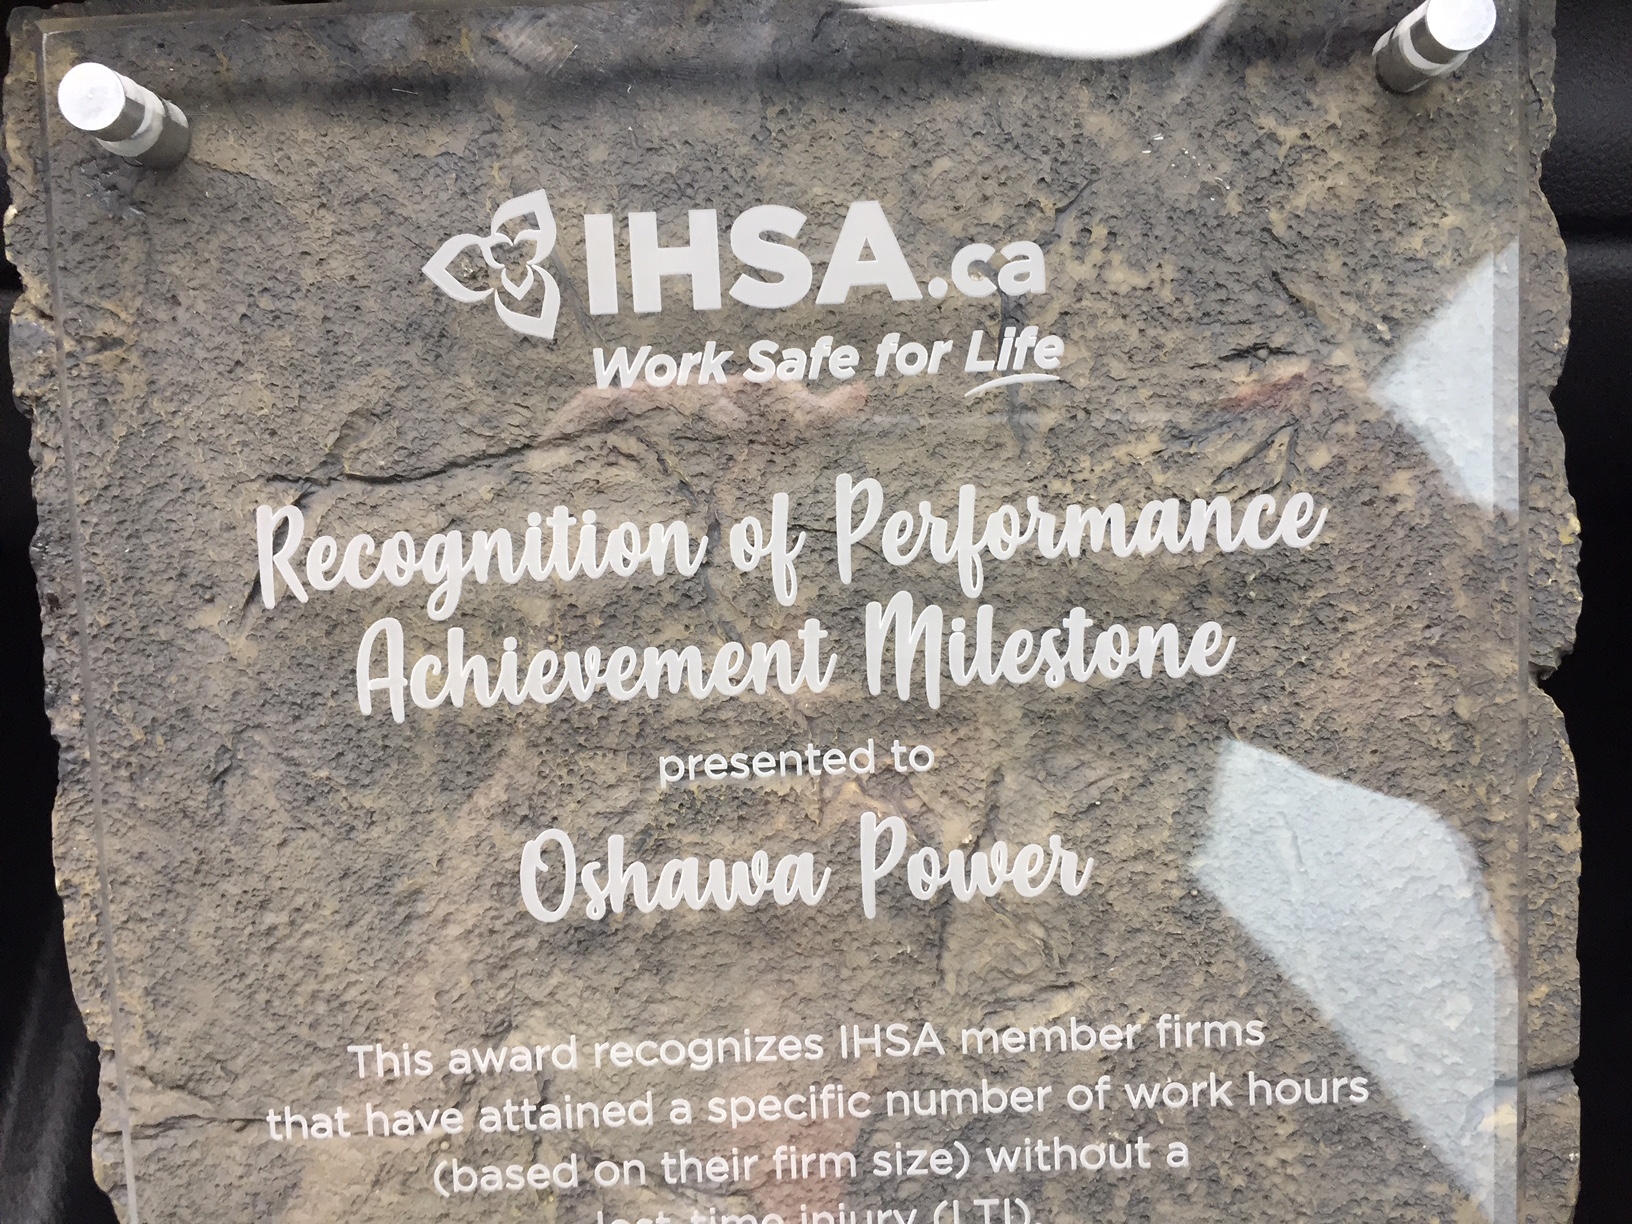 Oshawa Power receives second safety award in one week